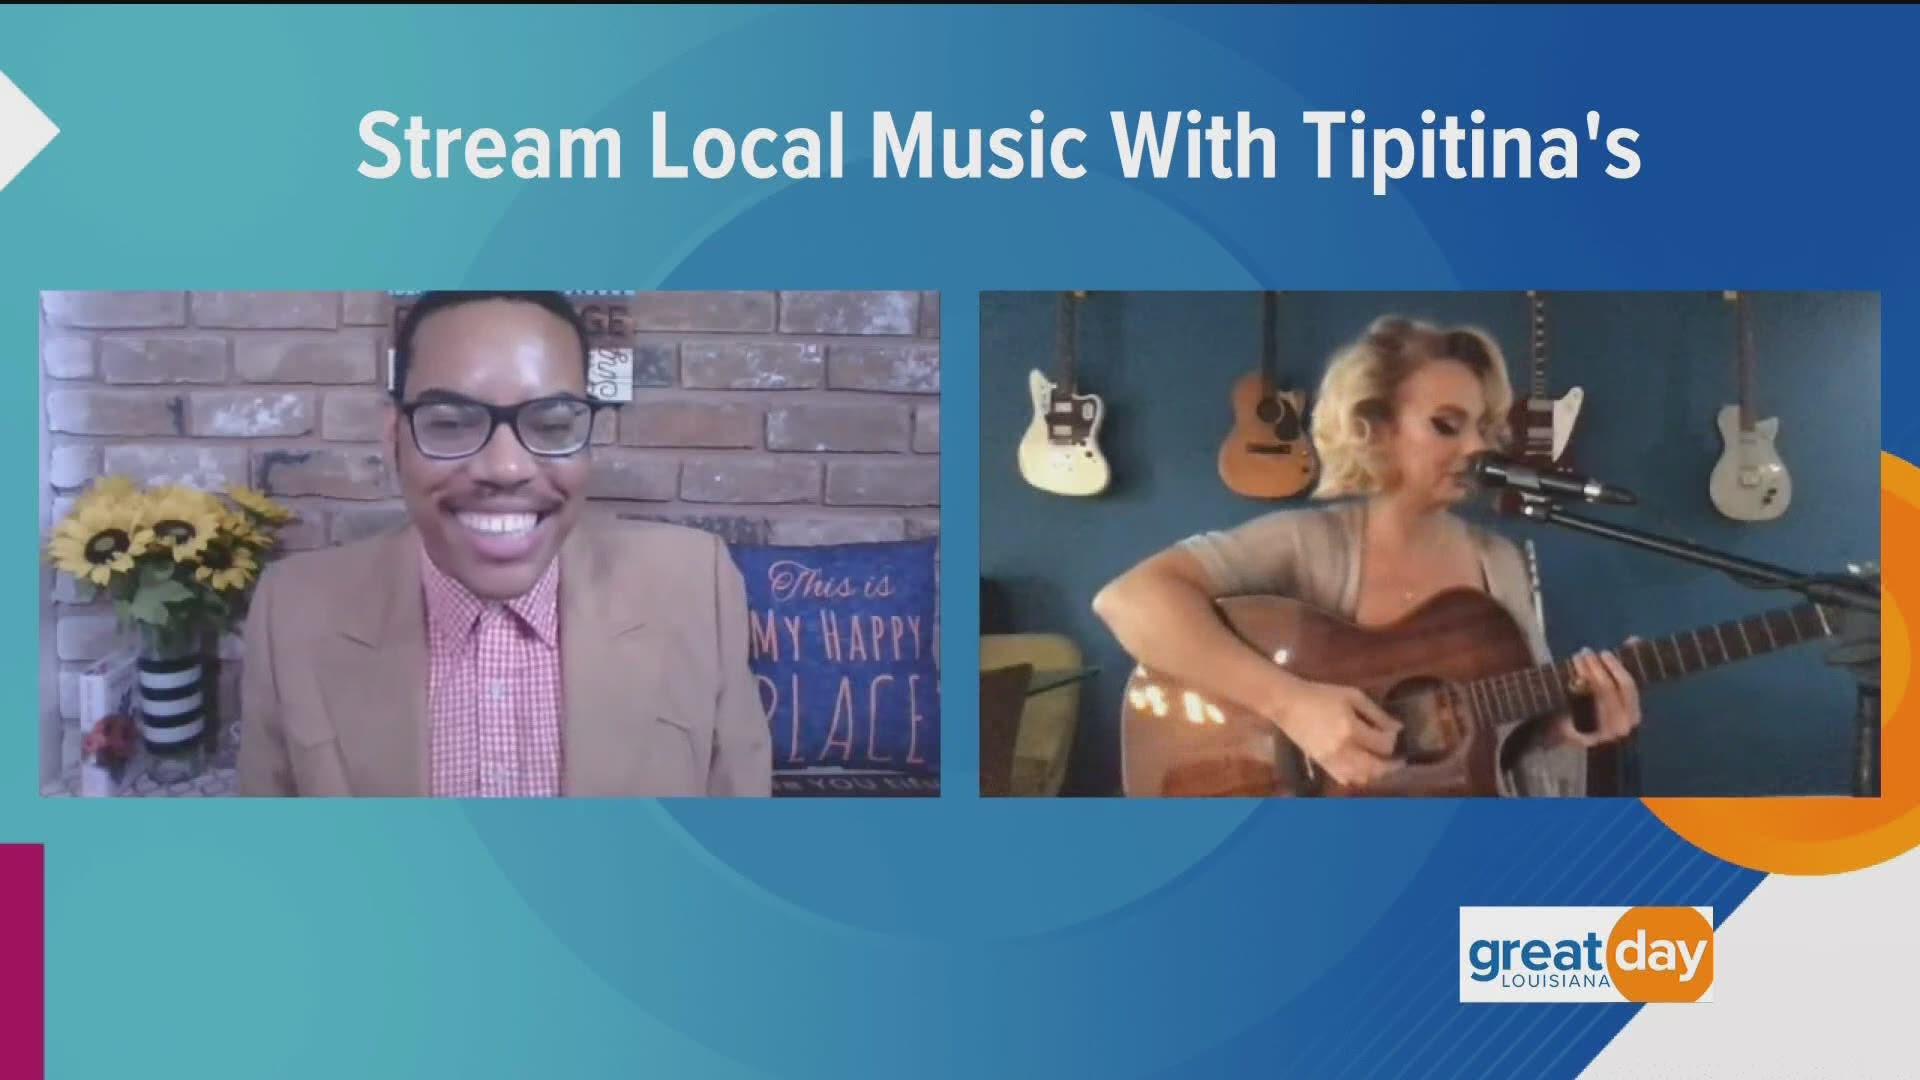 You can check out Samantha Fish on September 12th on Tipitinas.TV. For more information about Samantha Fish, visit SamanthaFish.com.